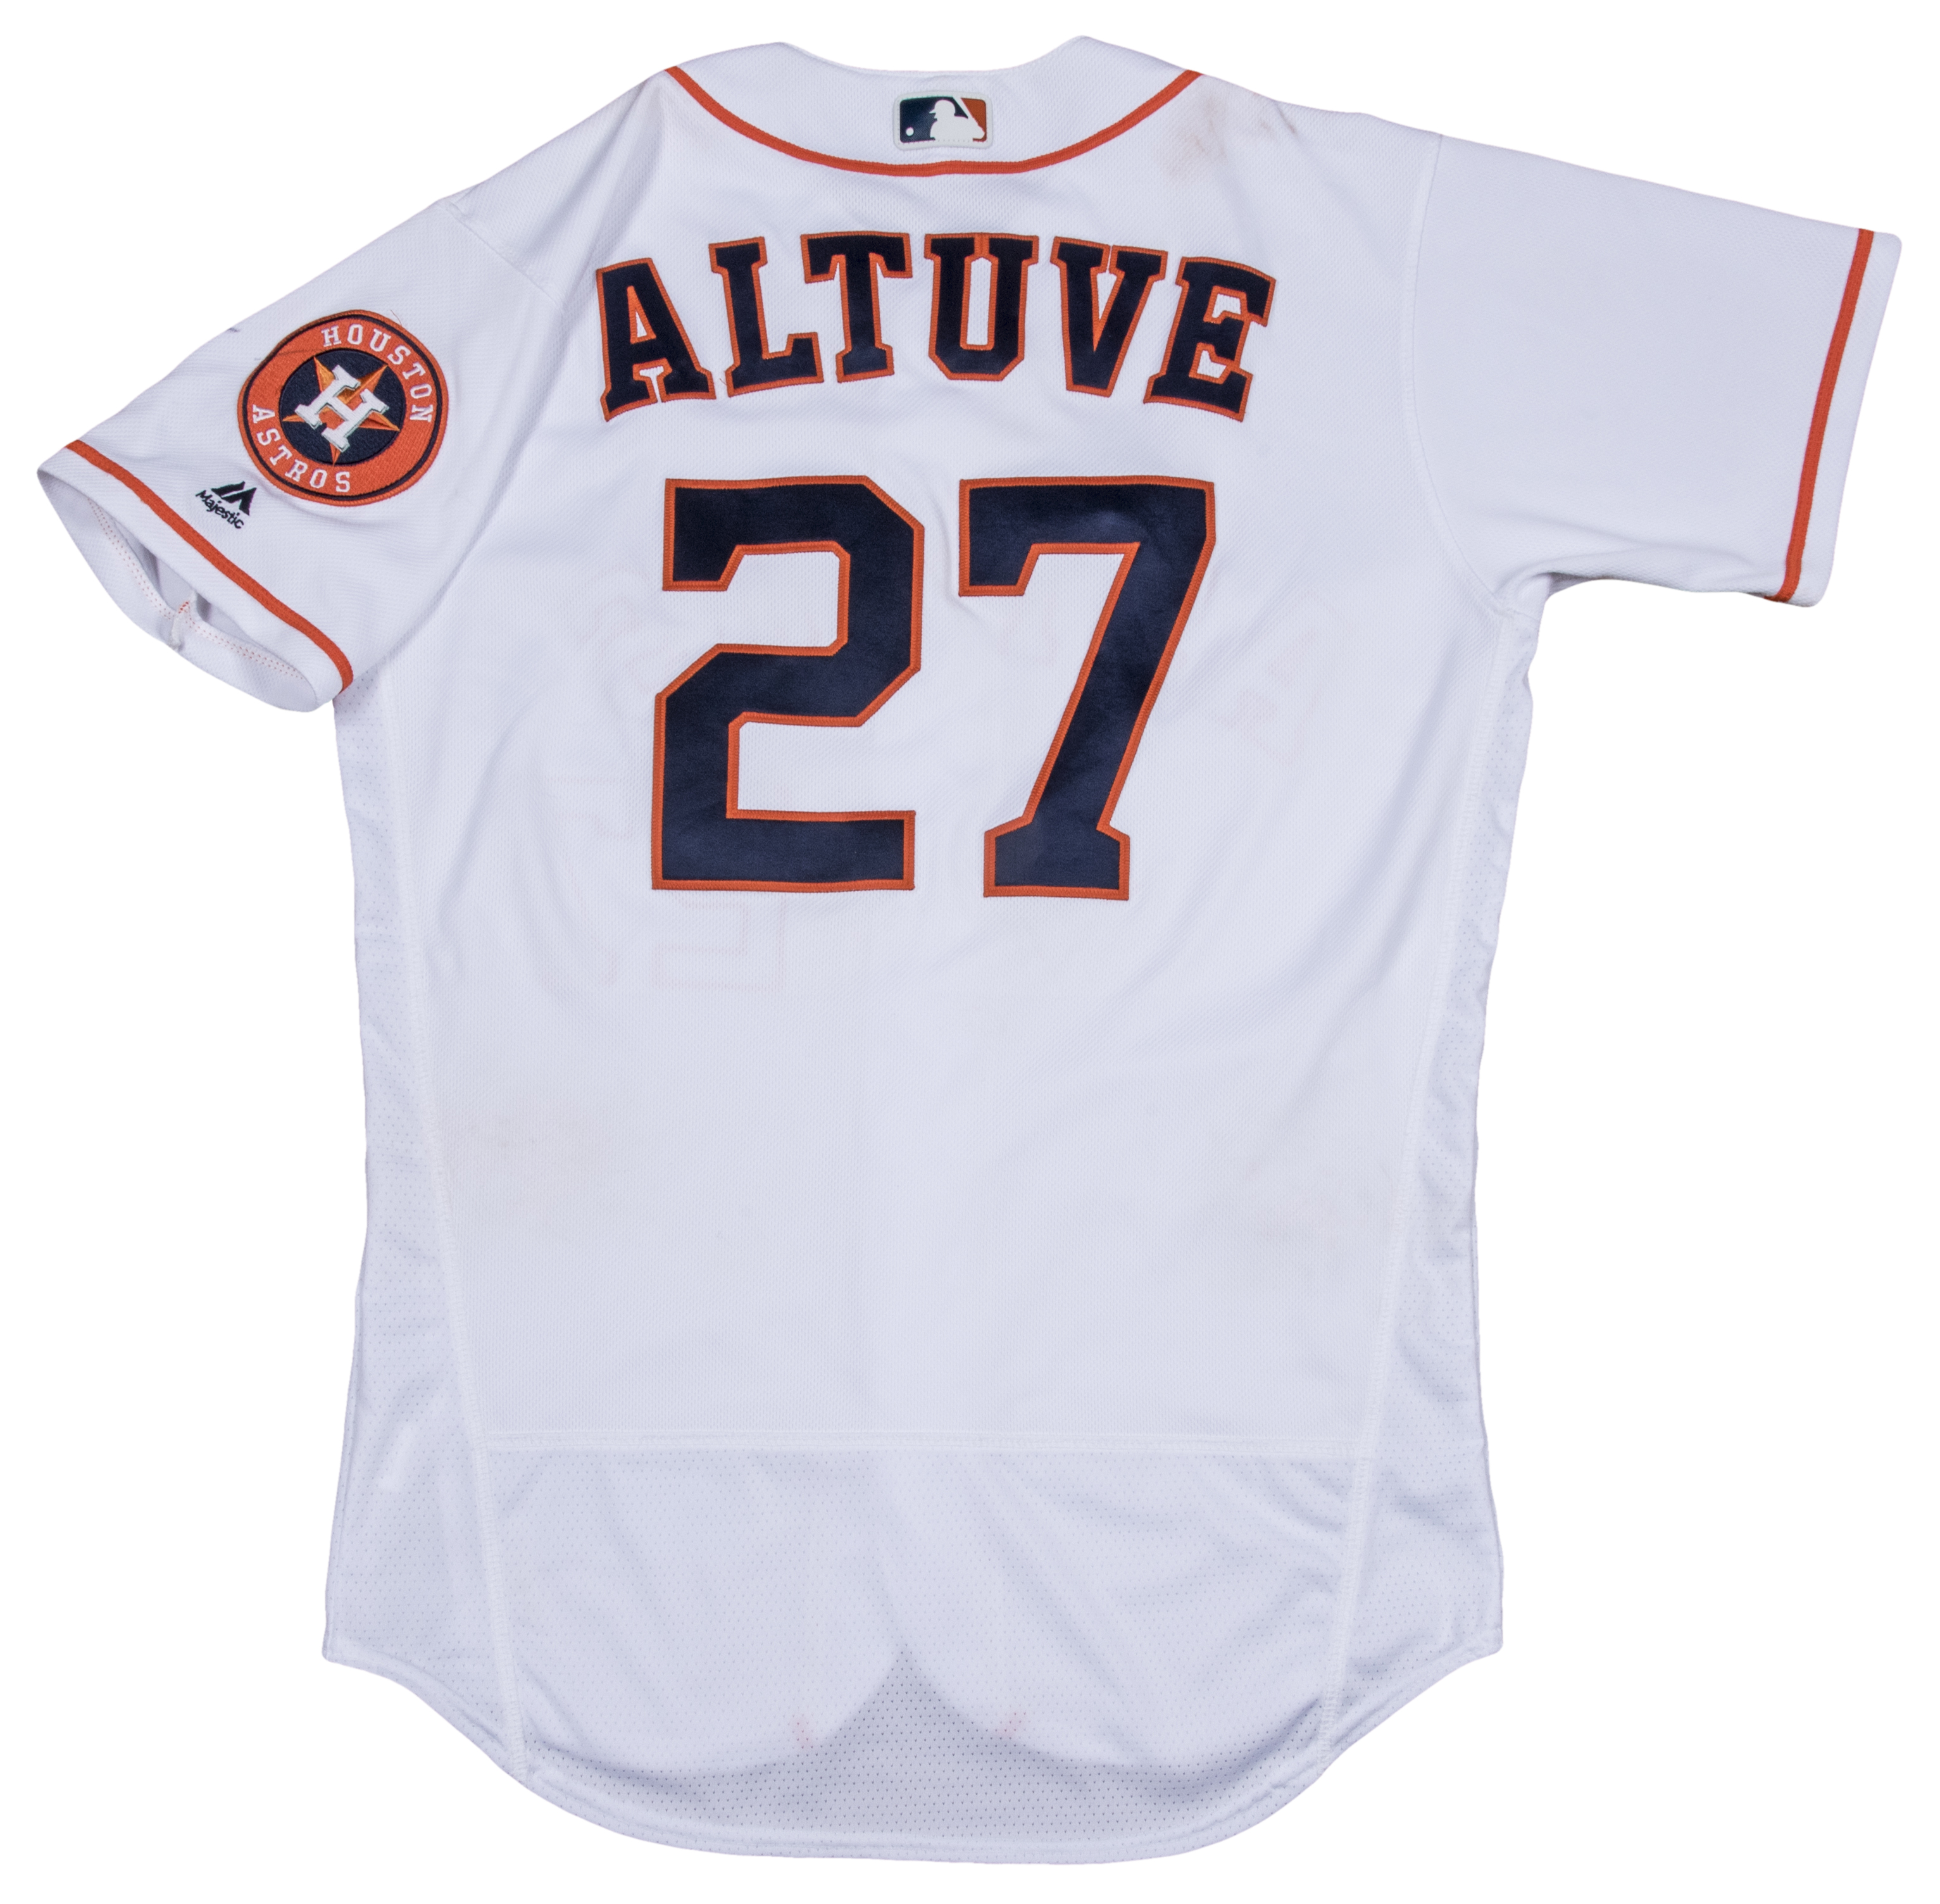 astros home jersey